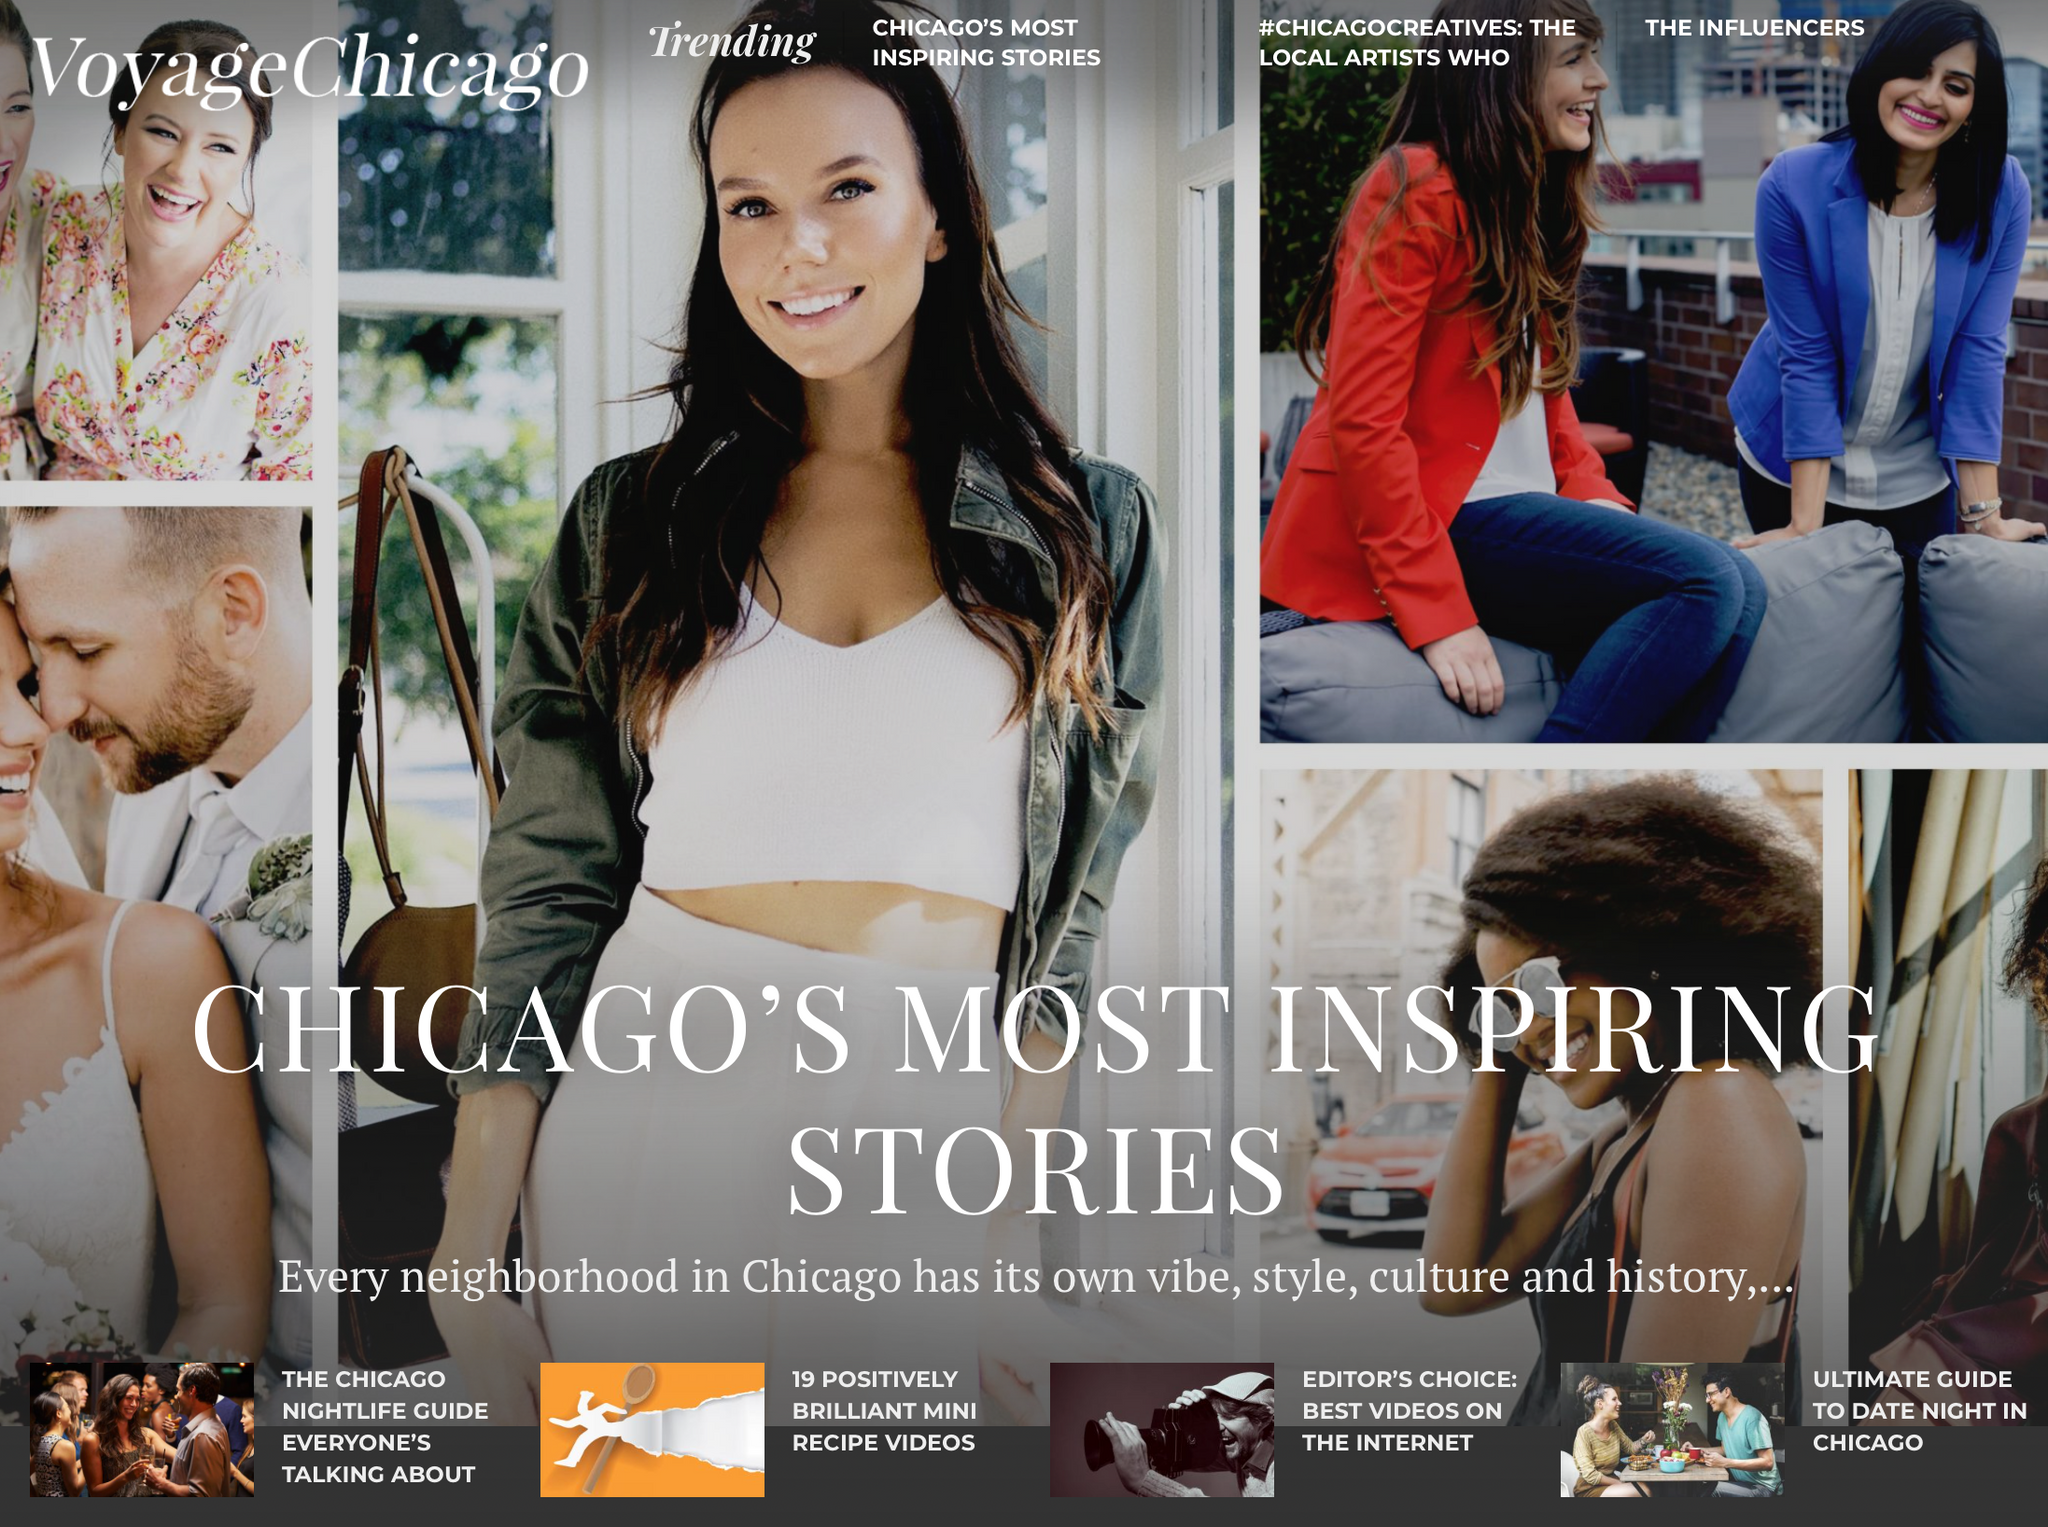 NYET JEWELRY INTERVIEW IN VOYAGECHICAGO.COM